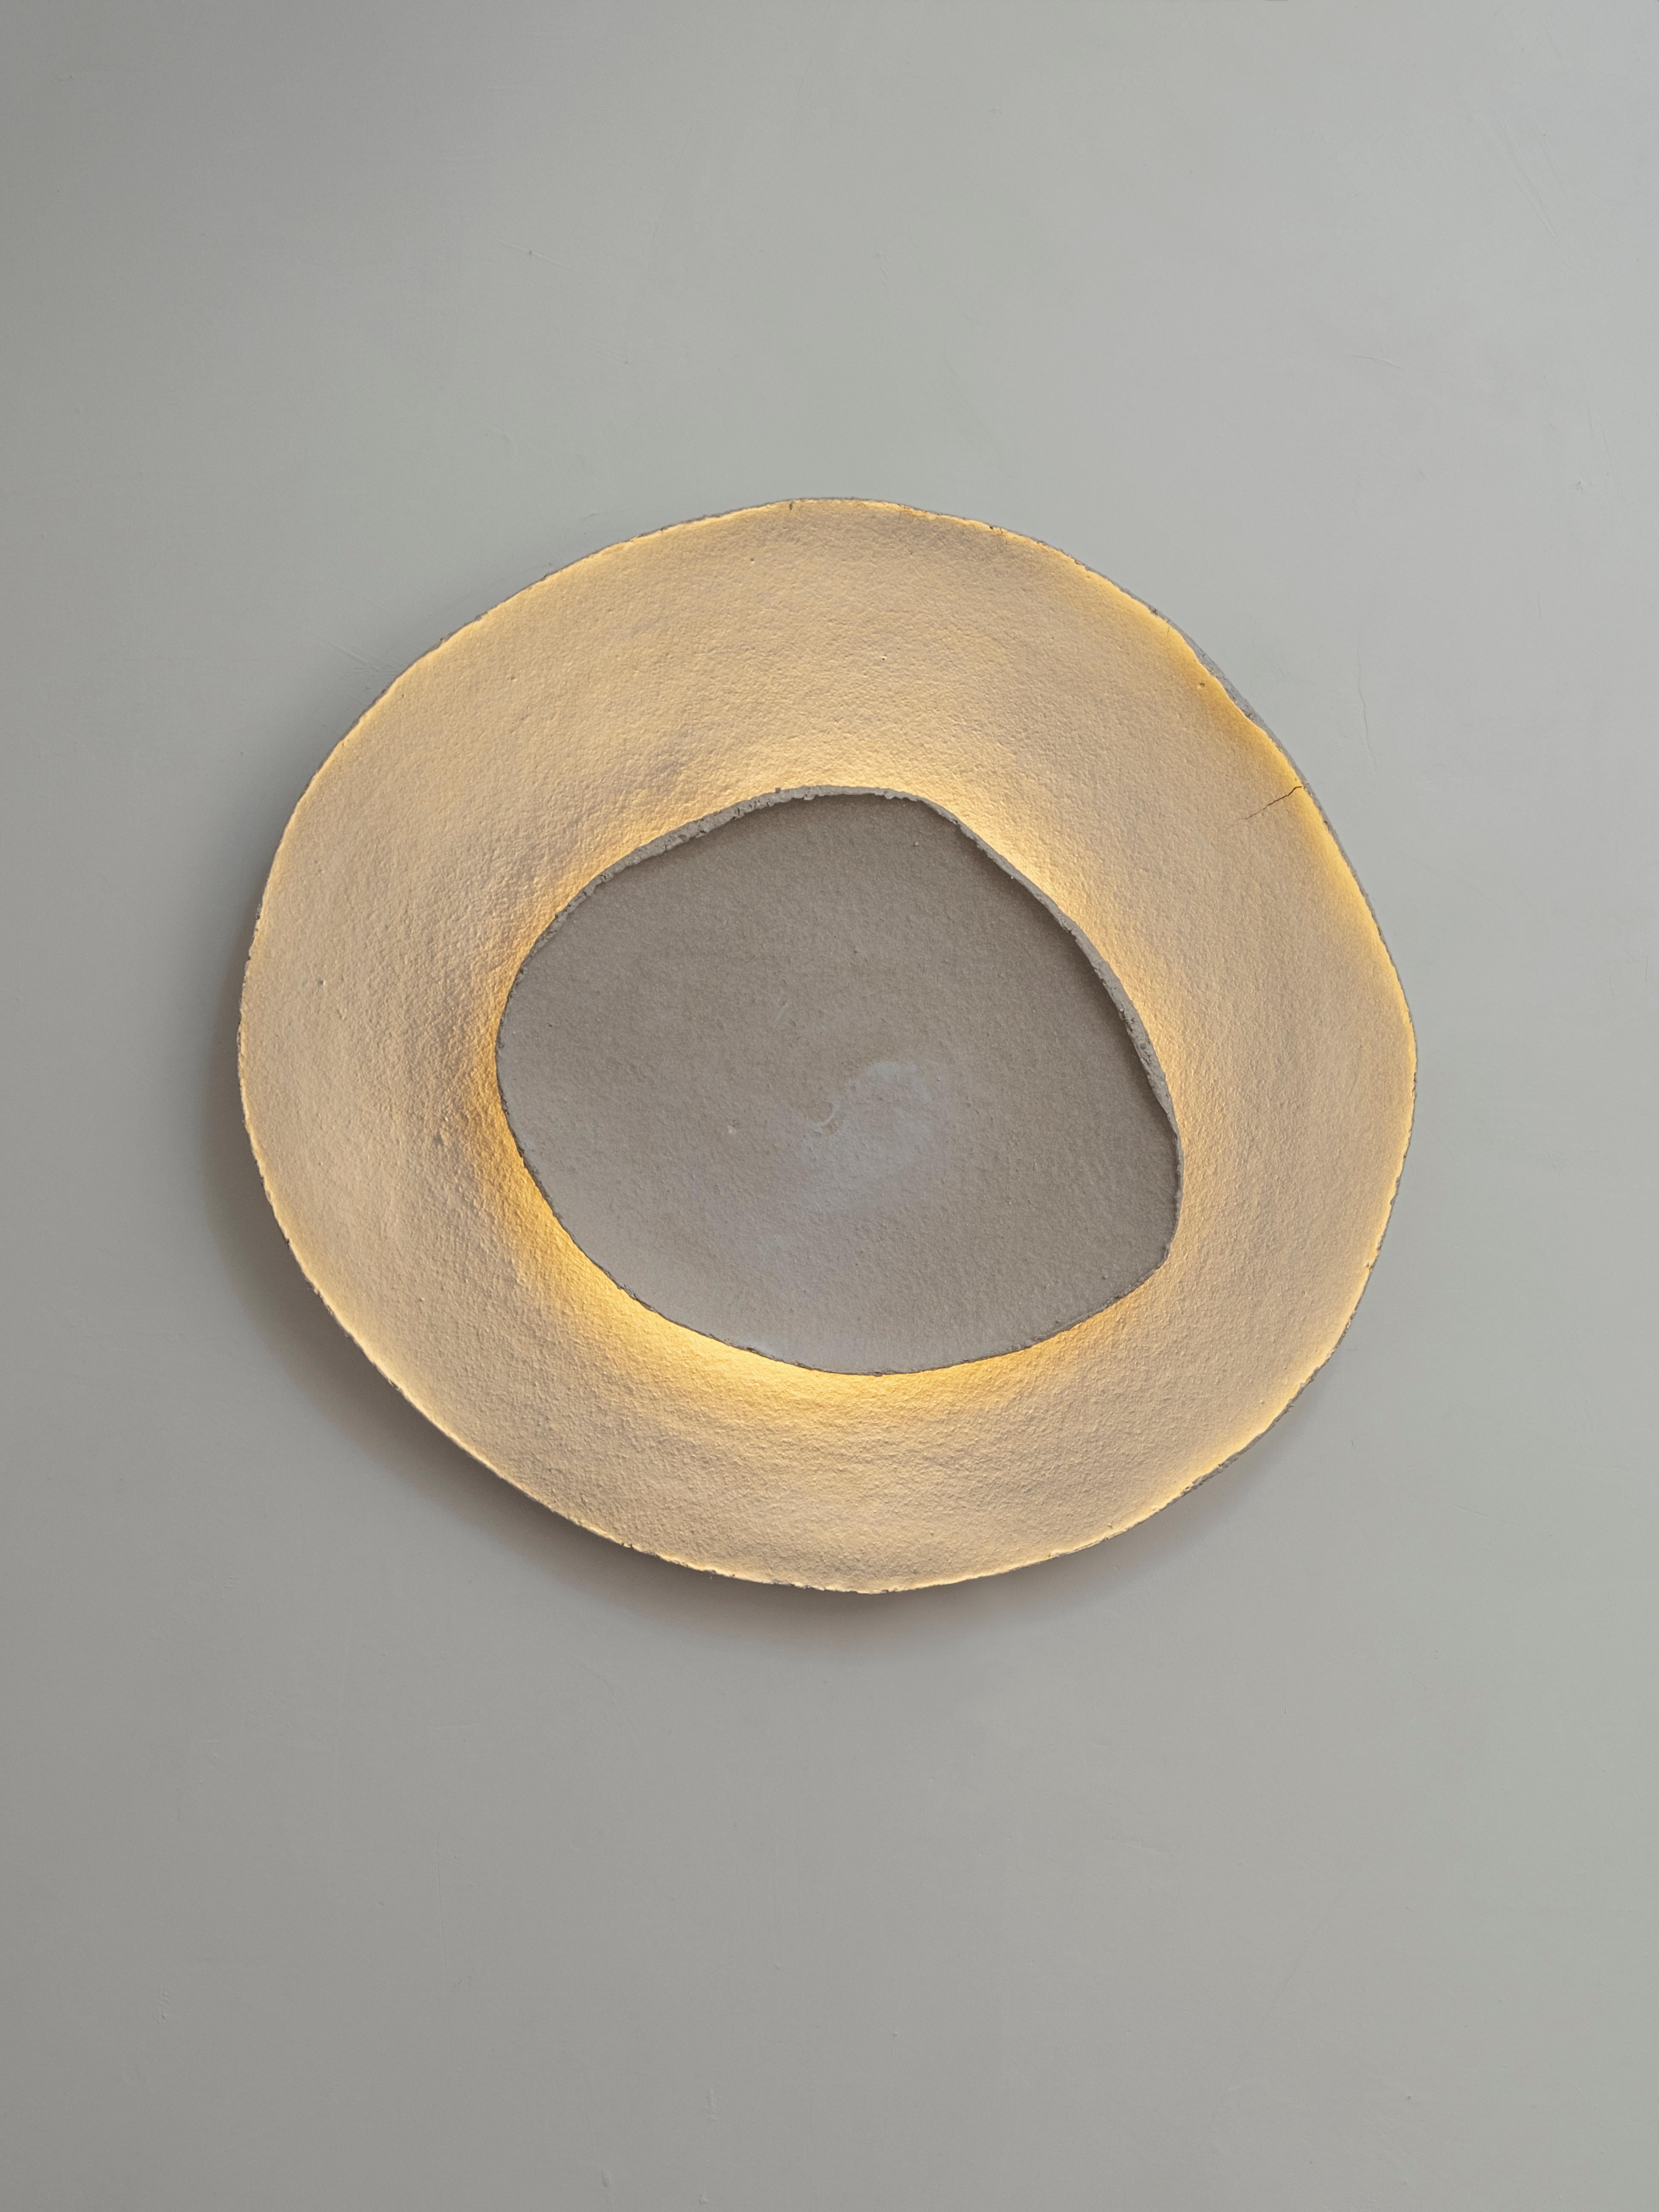 Bone #17 wall light by Margaux Leycuras
One of a Kind, Signed and numbered
Dimensions: Ø58, H54 cm 
Material: Ceramic, sand stoneware tops with a porcelain engobe finish.
The piece is signed, numbered and delivered with a certificate of